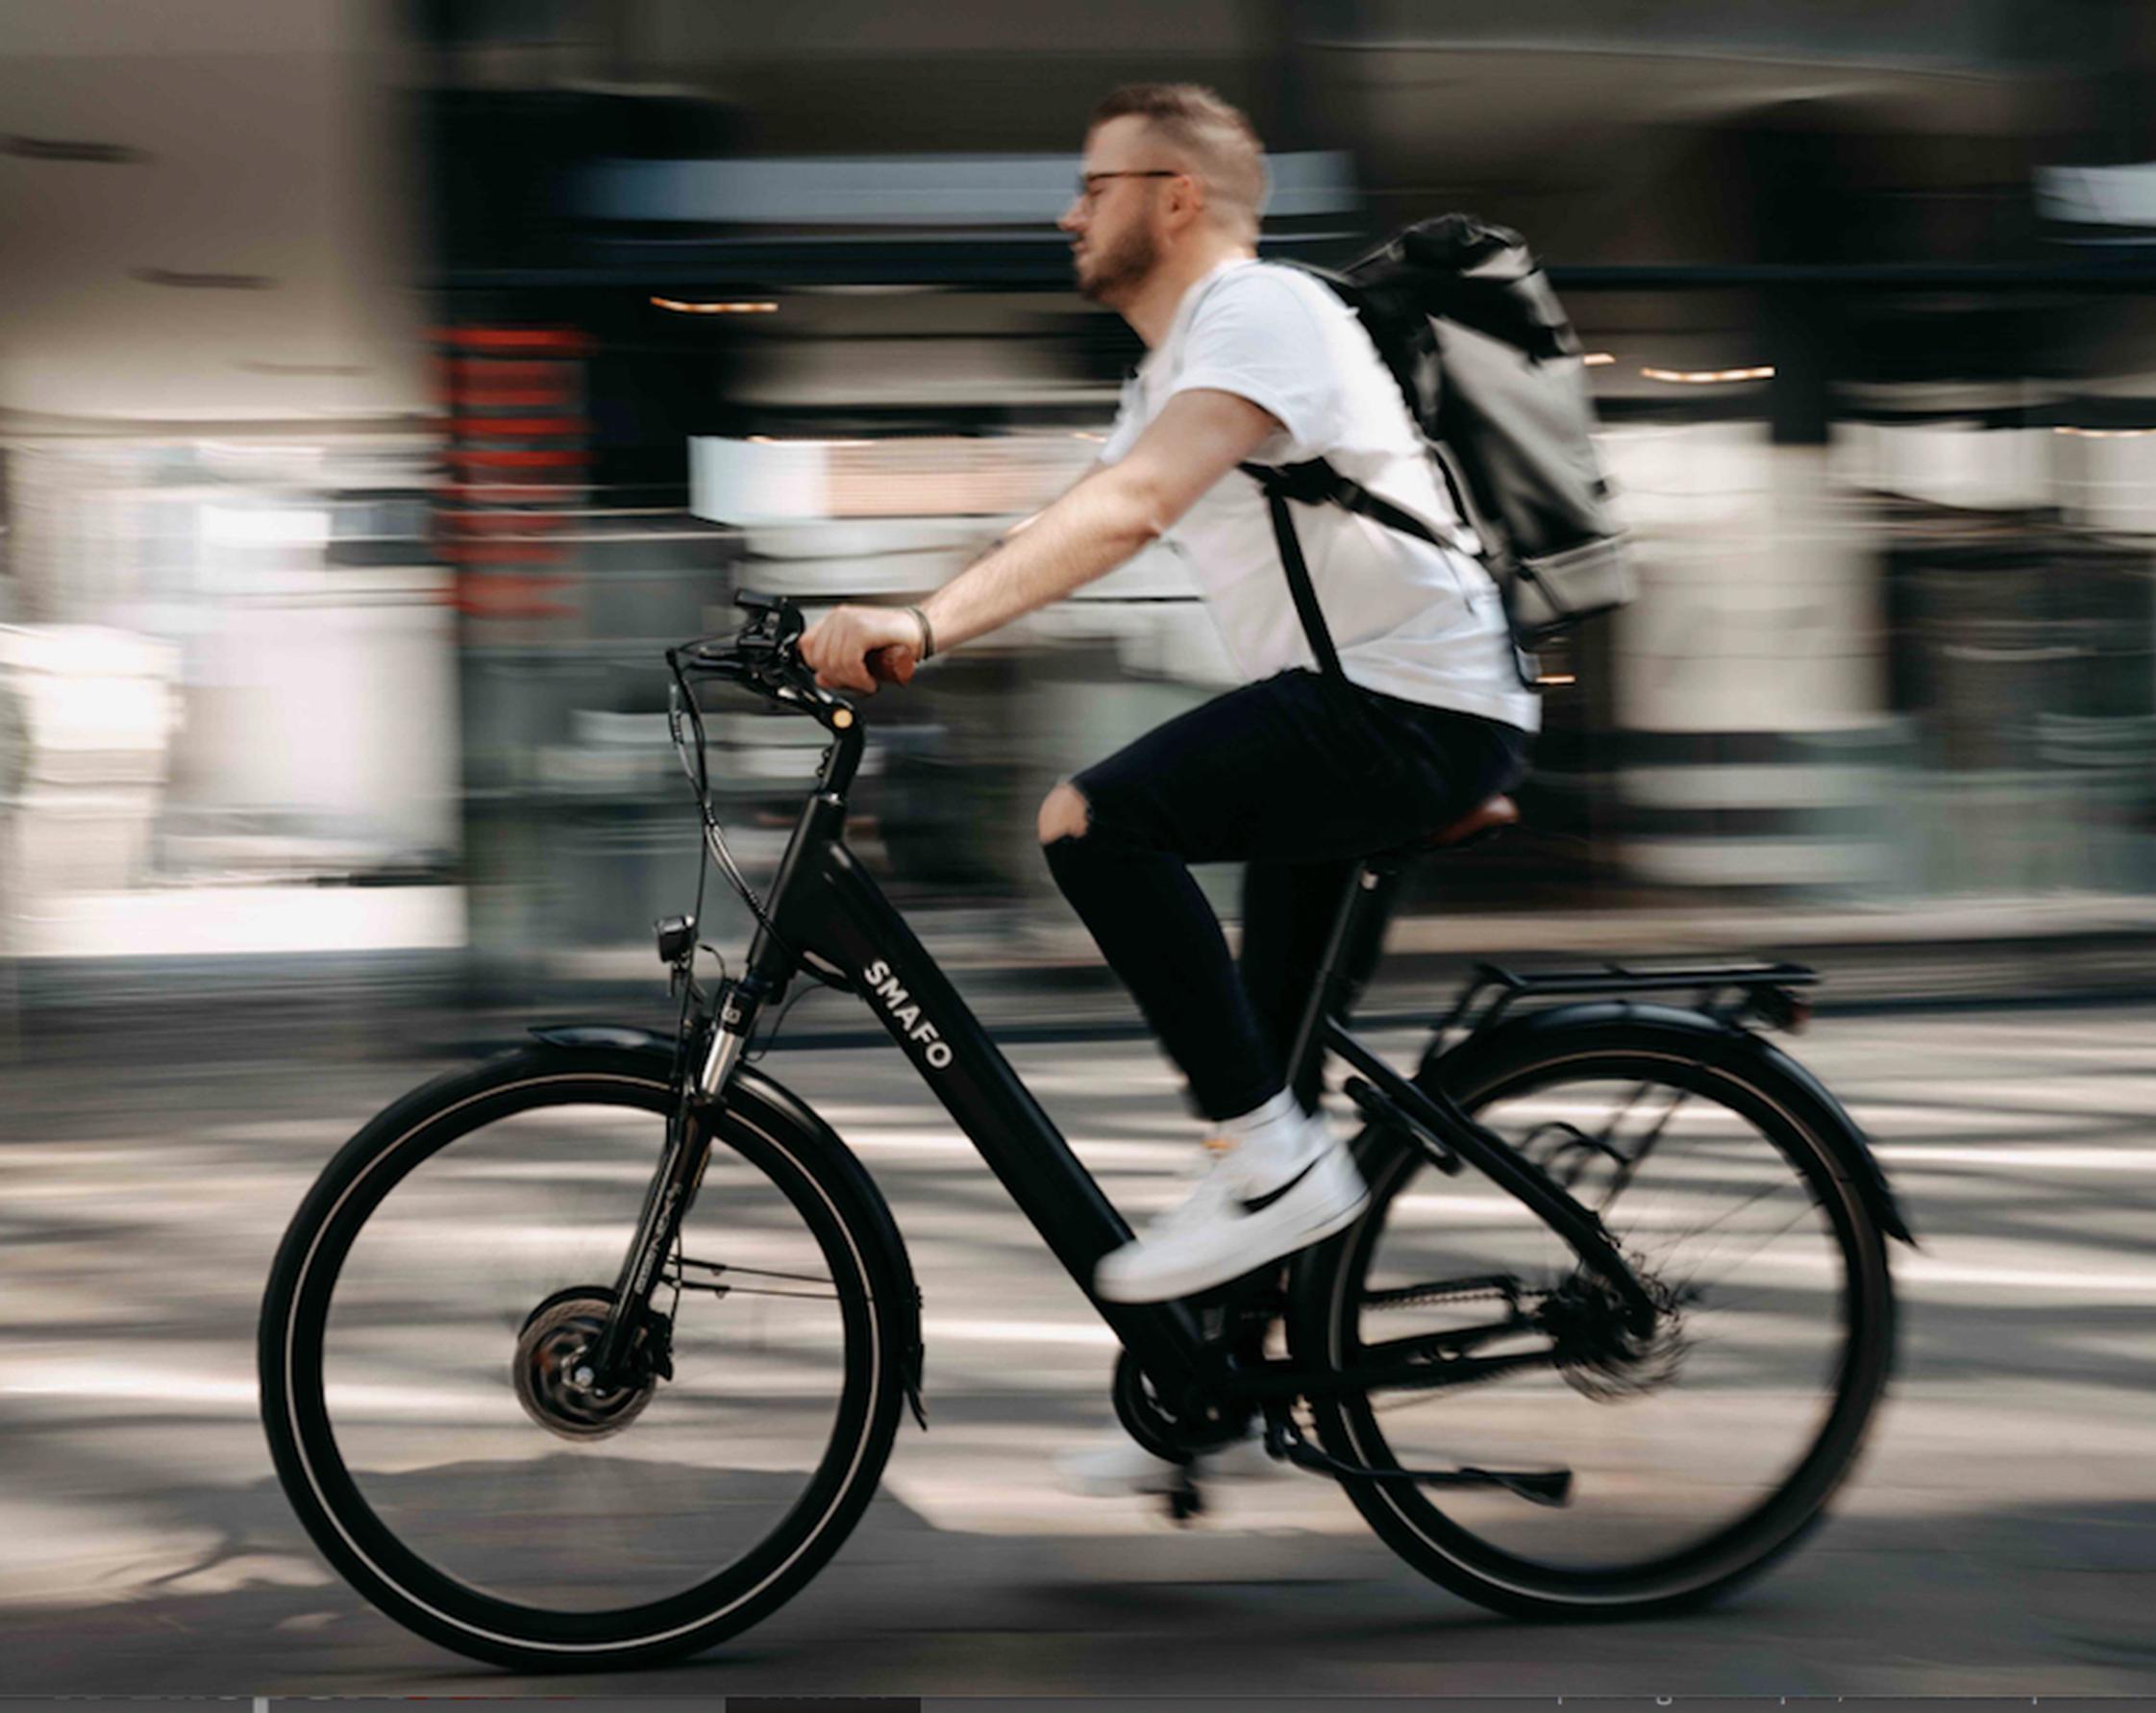 Government must do more to encourage commuter journeys by e-bike to take pressure off other transport modes hard hit by COVID-19, says Bicycle Association (Image: Wolfram Bolte)